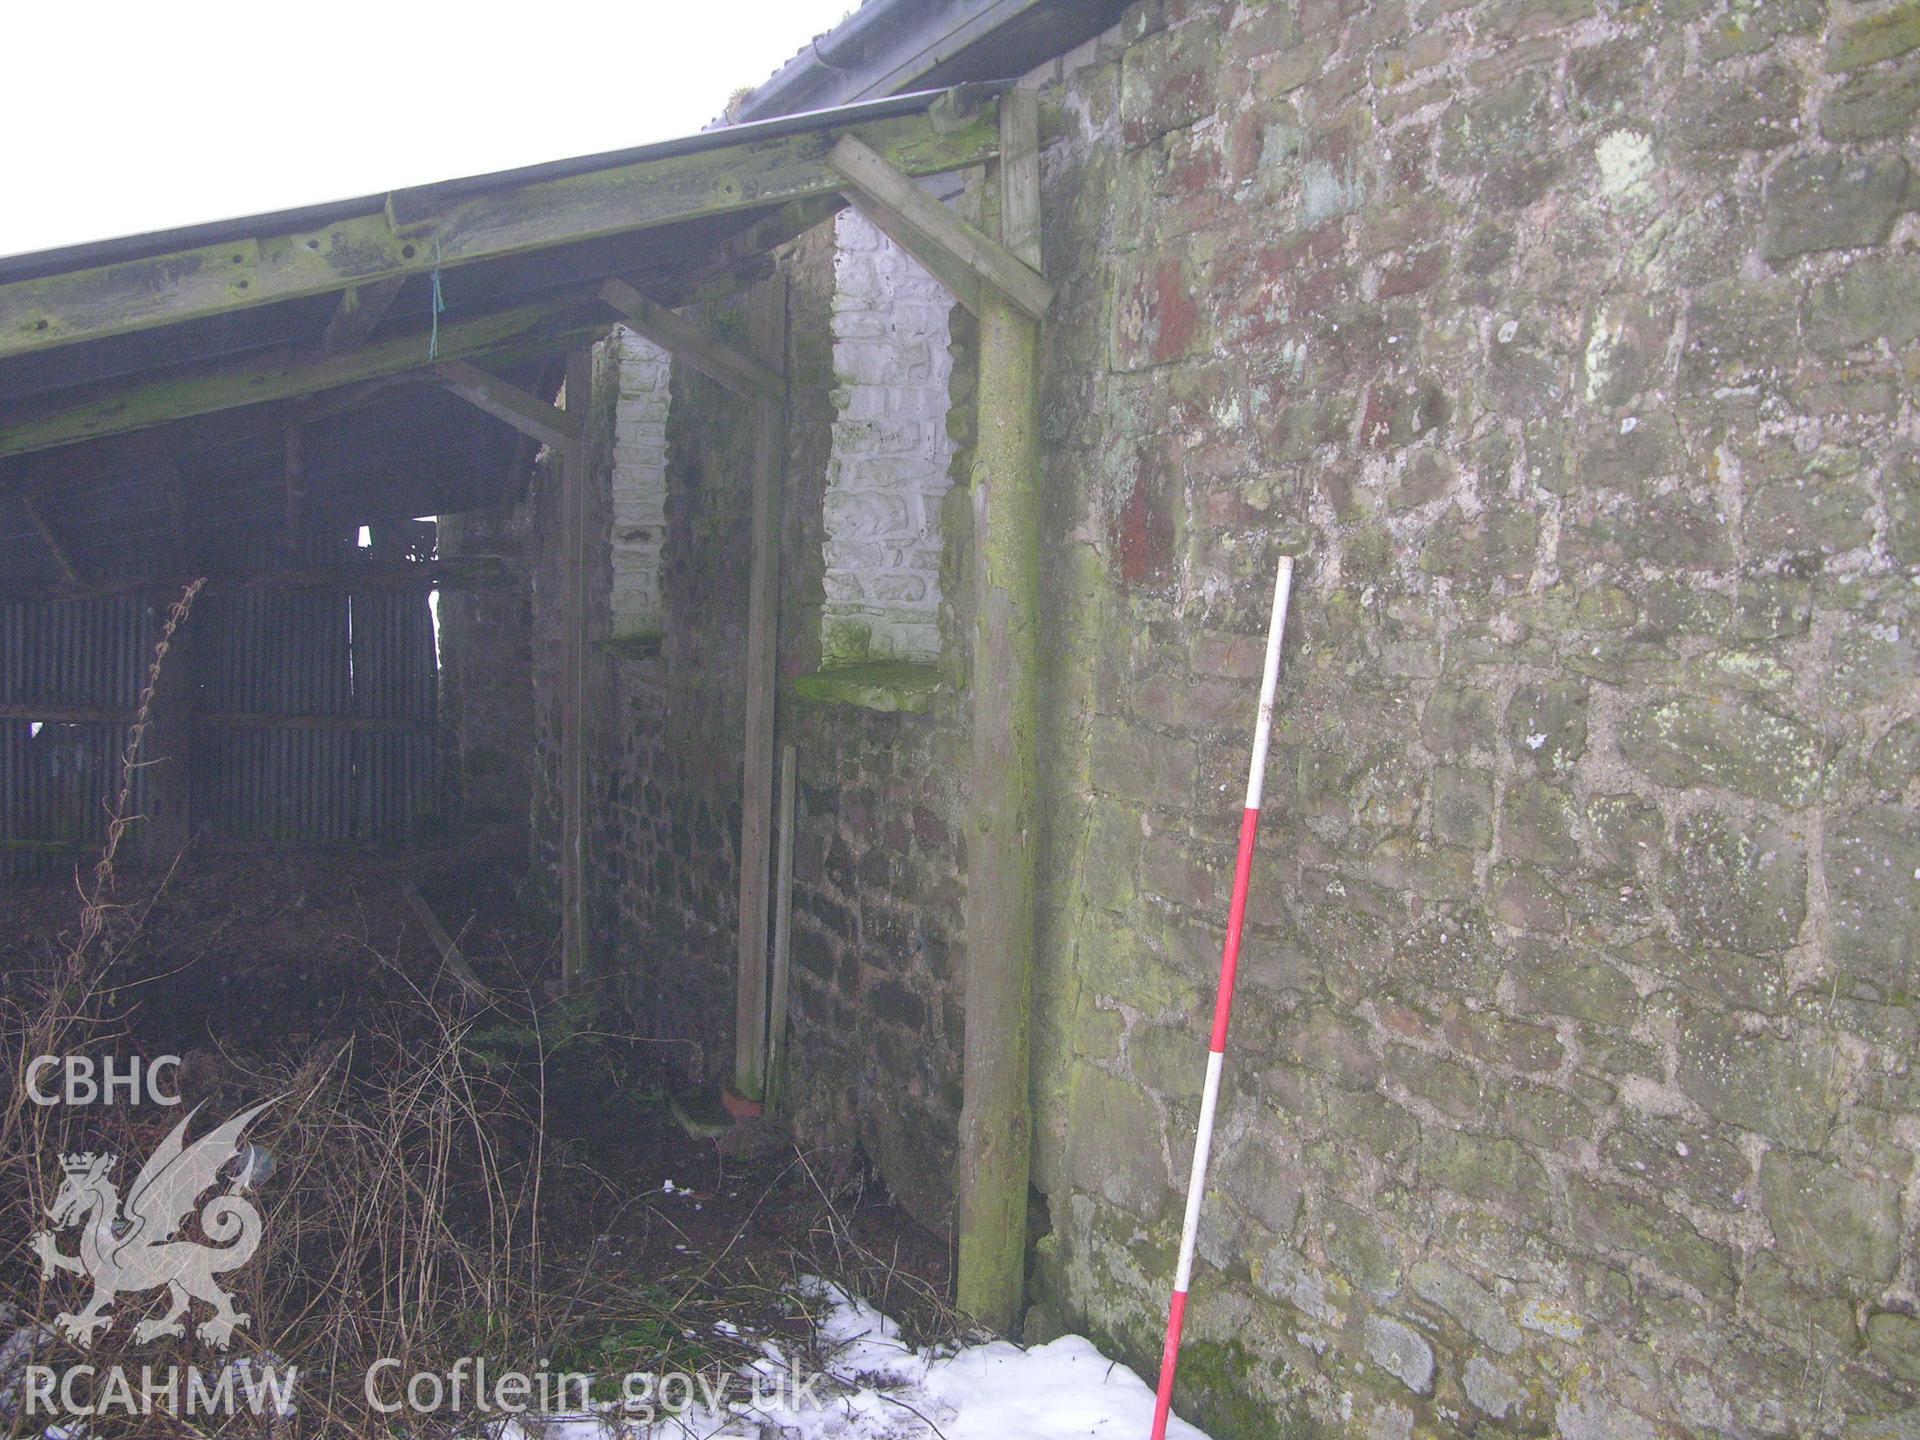 Digital photograph of an exterior barn wall, from an Archaeological Building Recording of Hillside Barn, Llanvaches, Monmouthshire, which was conducted by Cambrian Archaeological Projects.